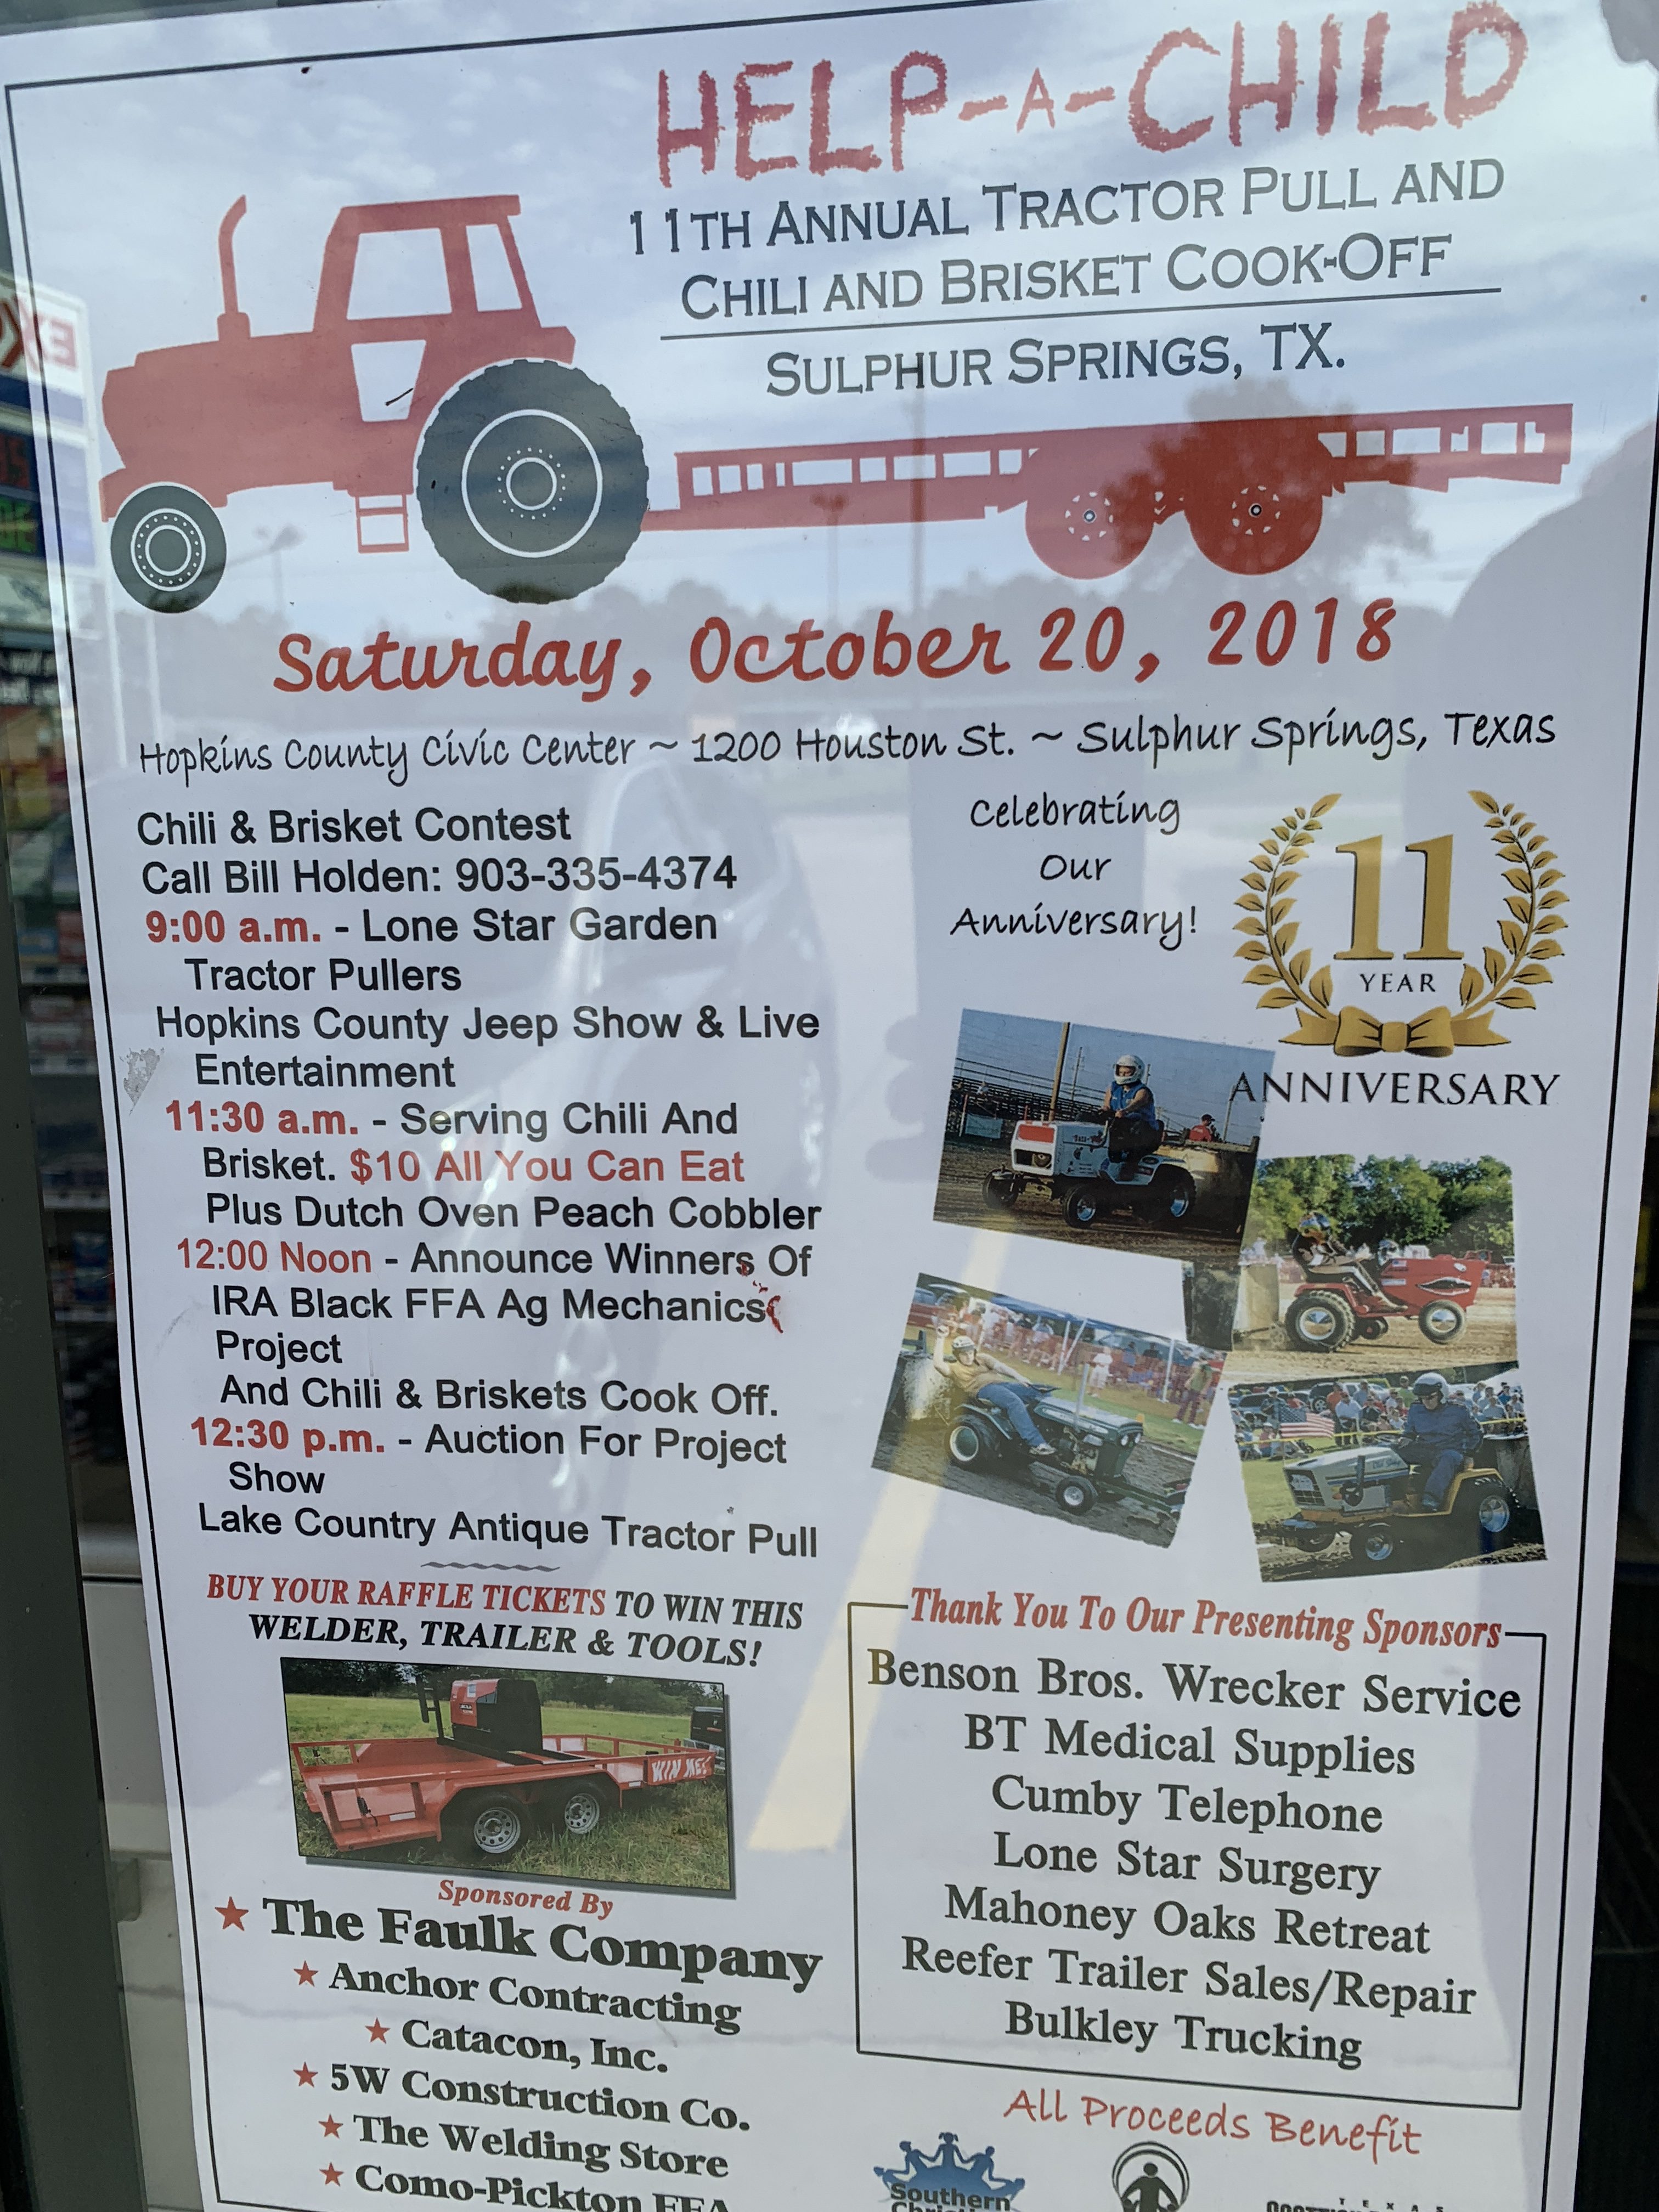 Help-A-Child 11th Annual Tractor Pull and Chili & Brisket Cook-Off on Saturday at Civic Center